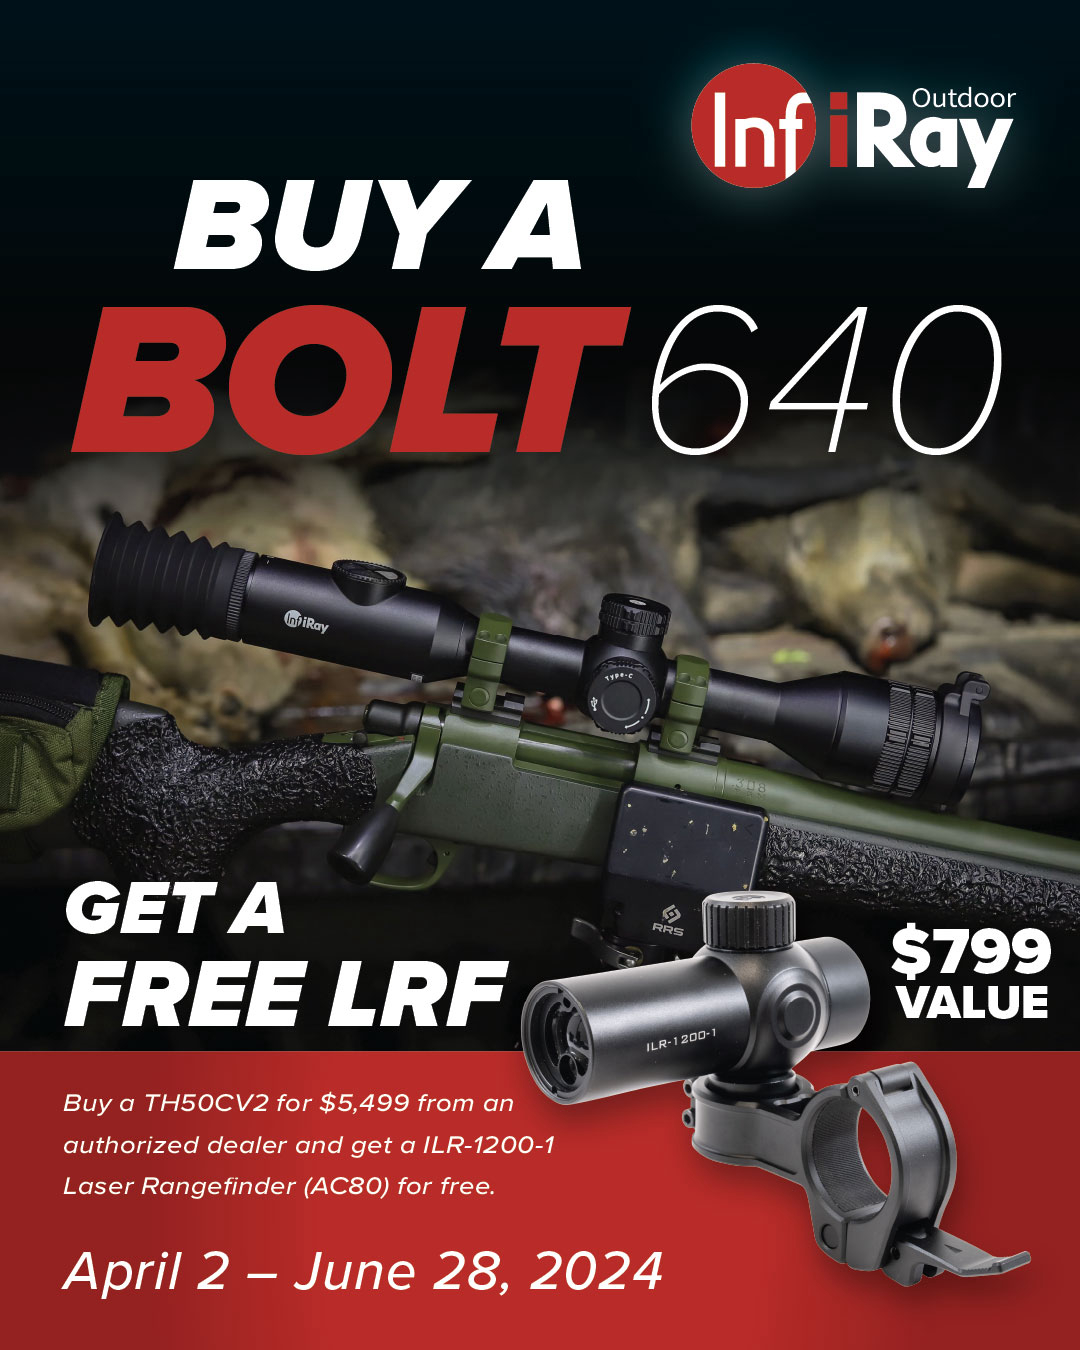 InfiRay Outdoor Special Offer: Free LRF with Purchase of BOLT TH50CV2